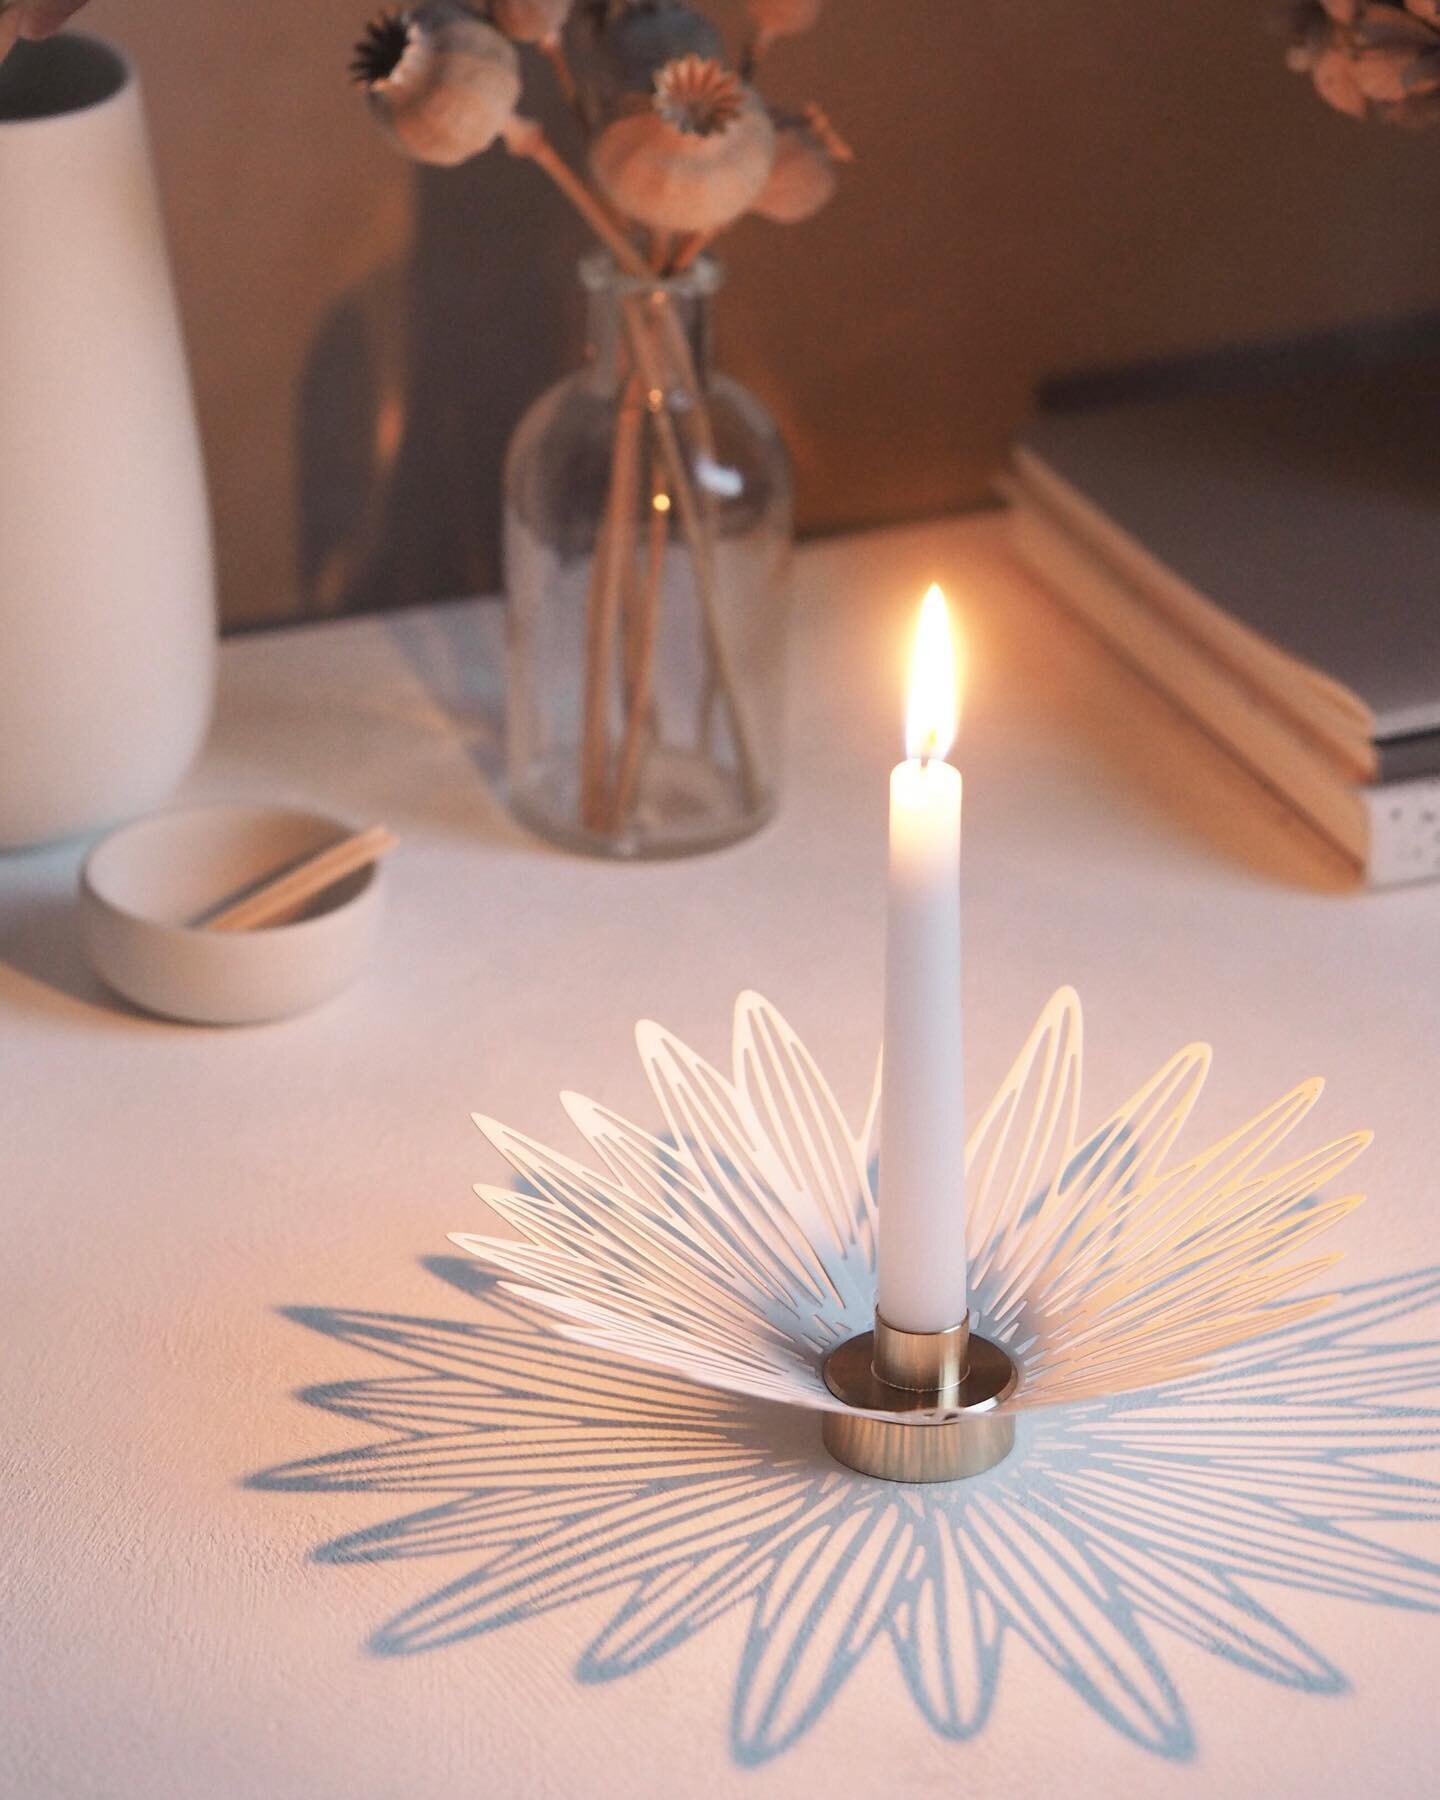 Rainy days like today just seem so much better with a little candlelight.

Shadow Series candle holders and hand-dipped candles available from aliceives.com 

Free delivery over &pound;50 with the code SHIP50

#shadowseriesbyaliceives #shadowseriesca